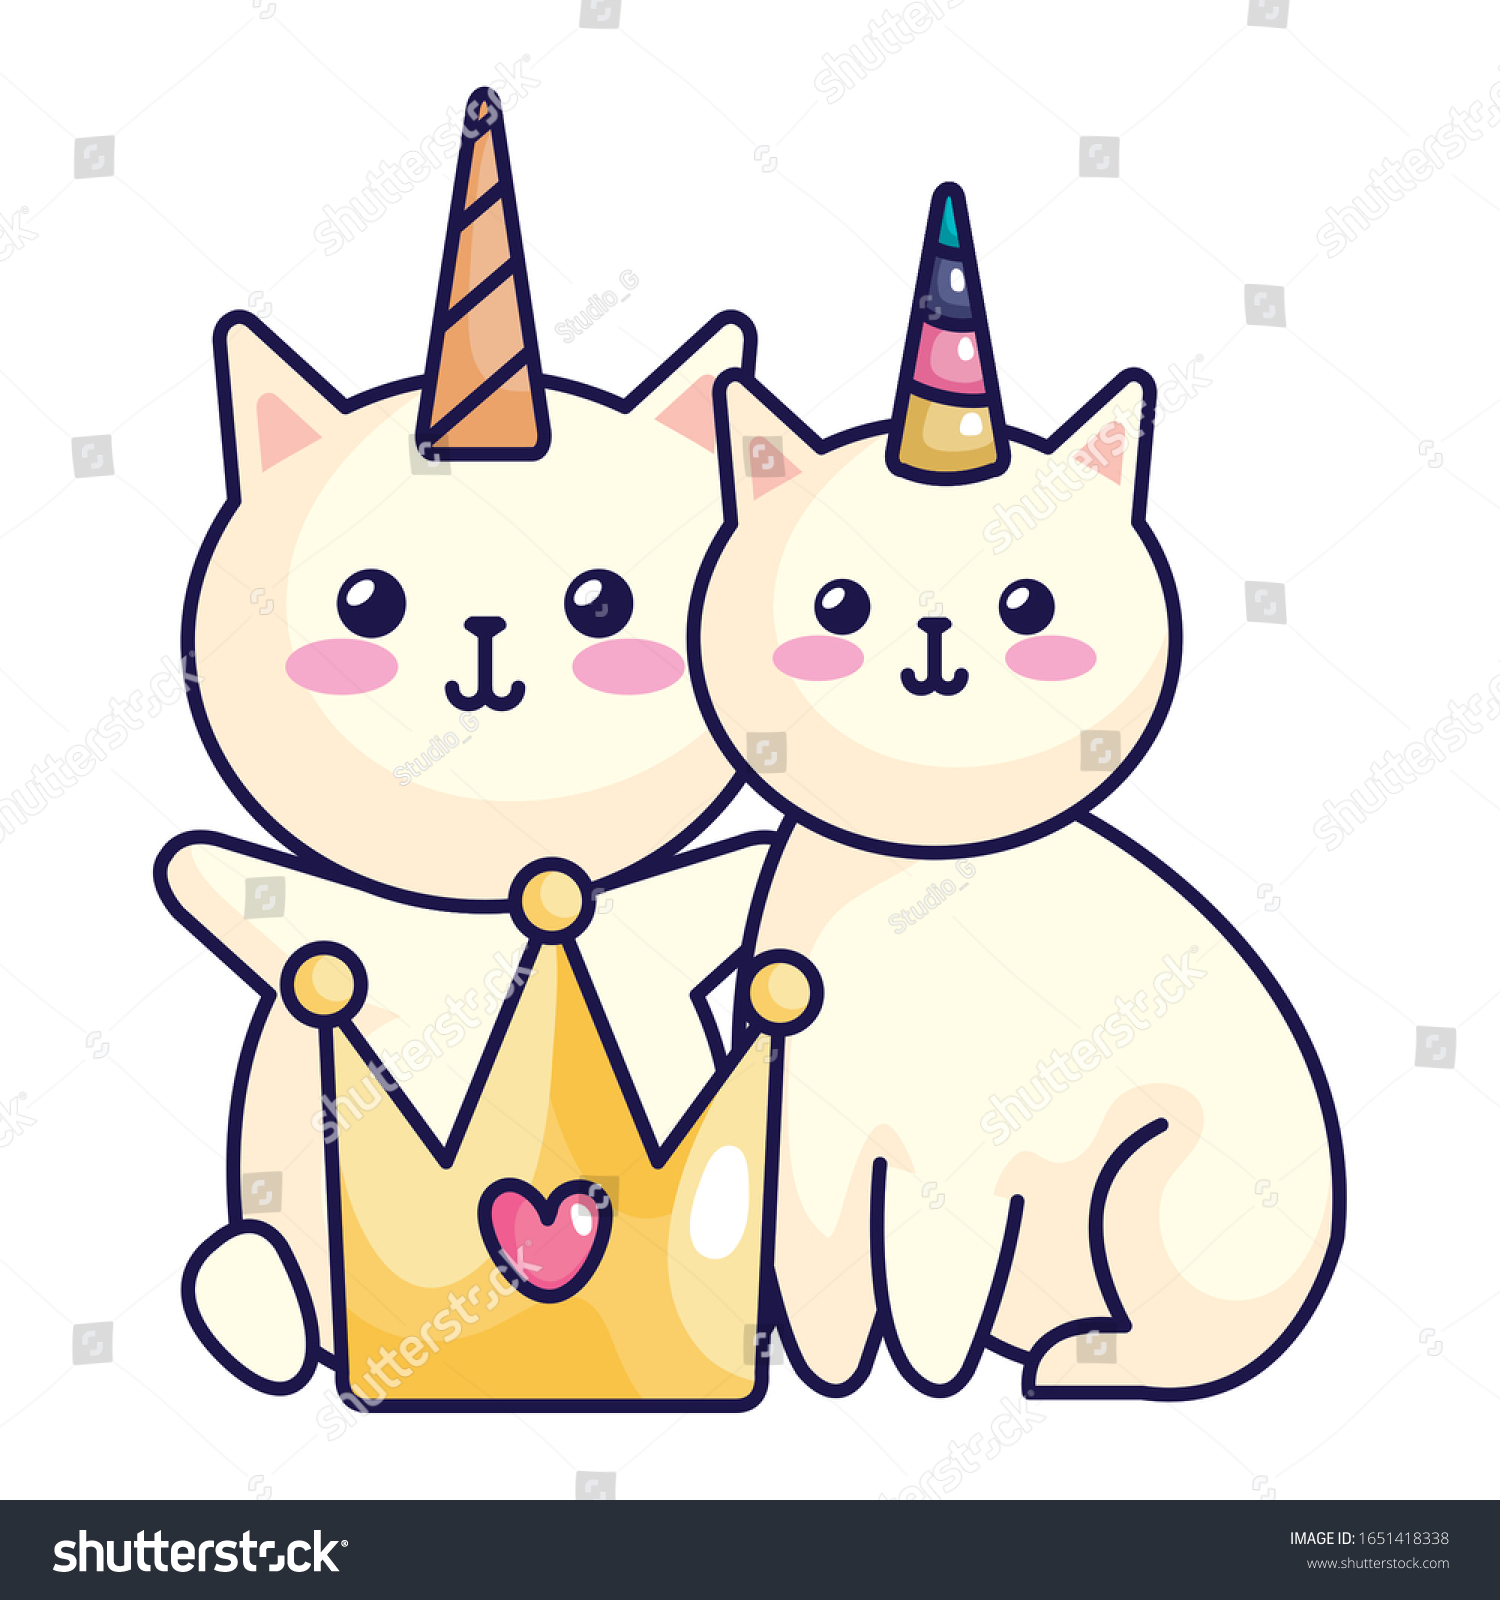 cute cats unicorn with crown icons vector illustration design #1651418338